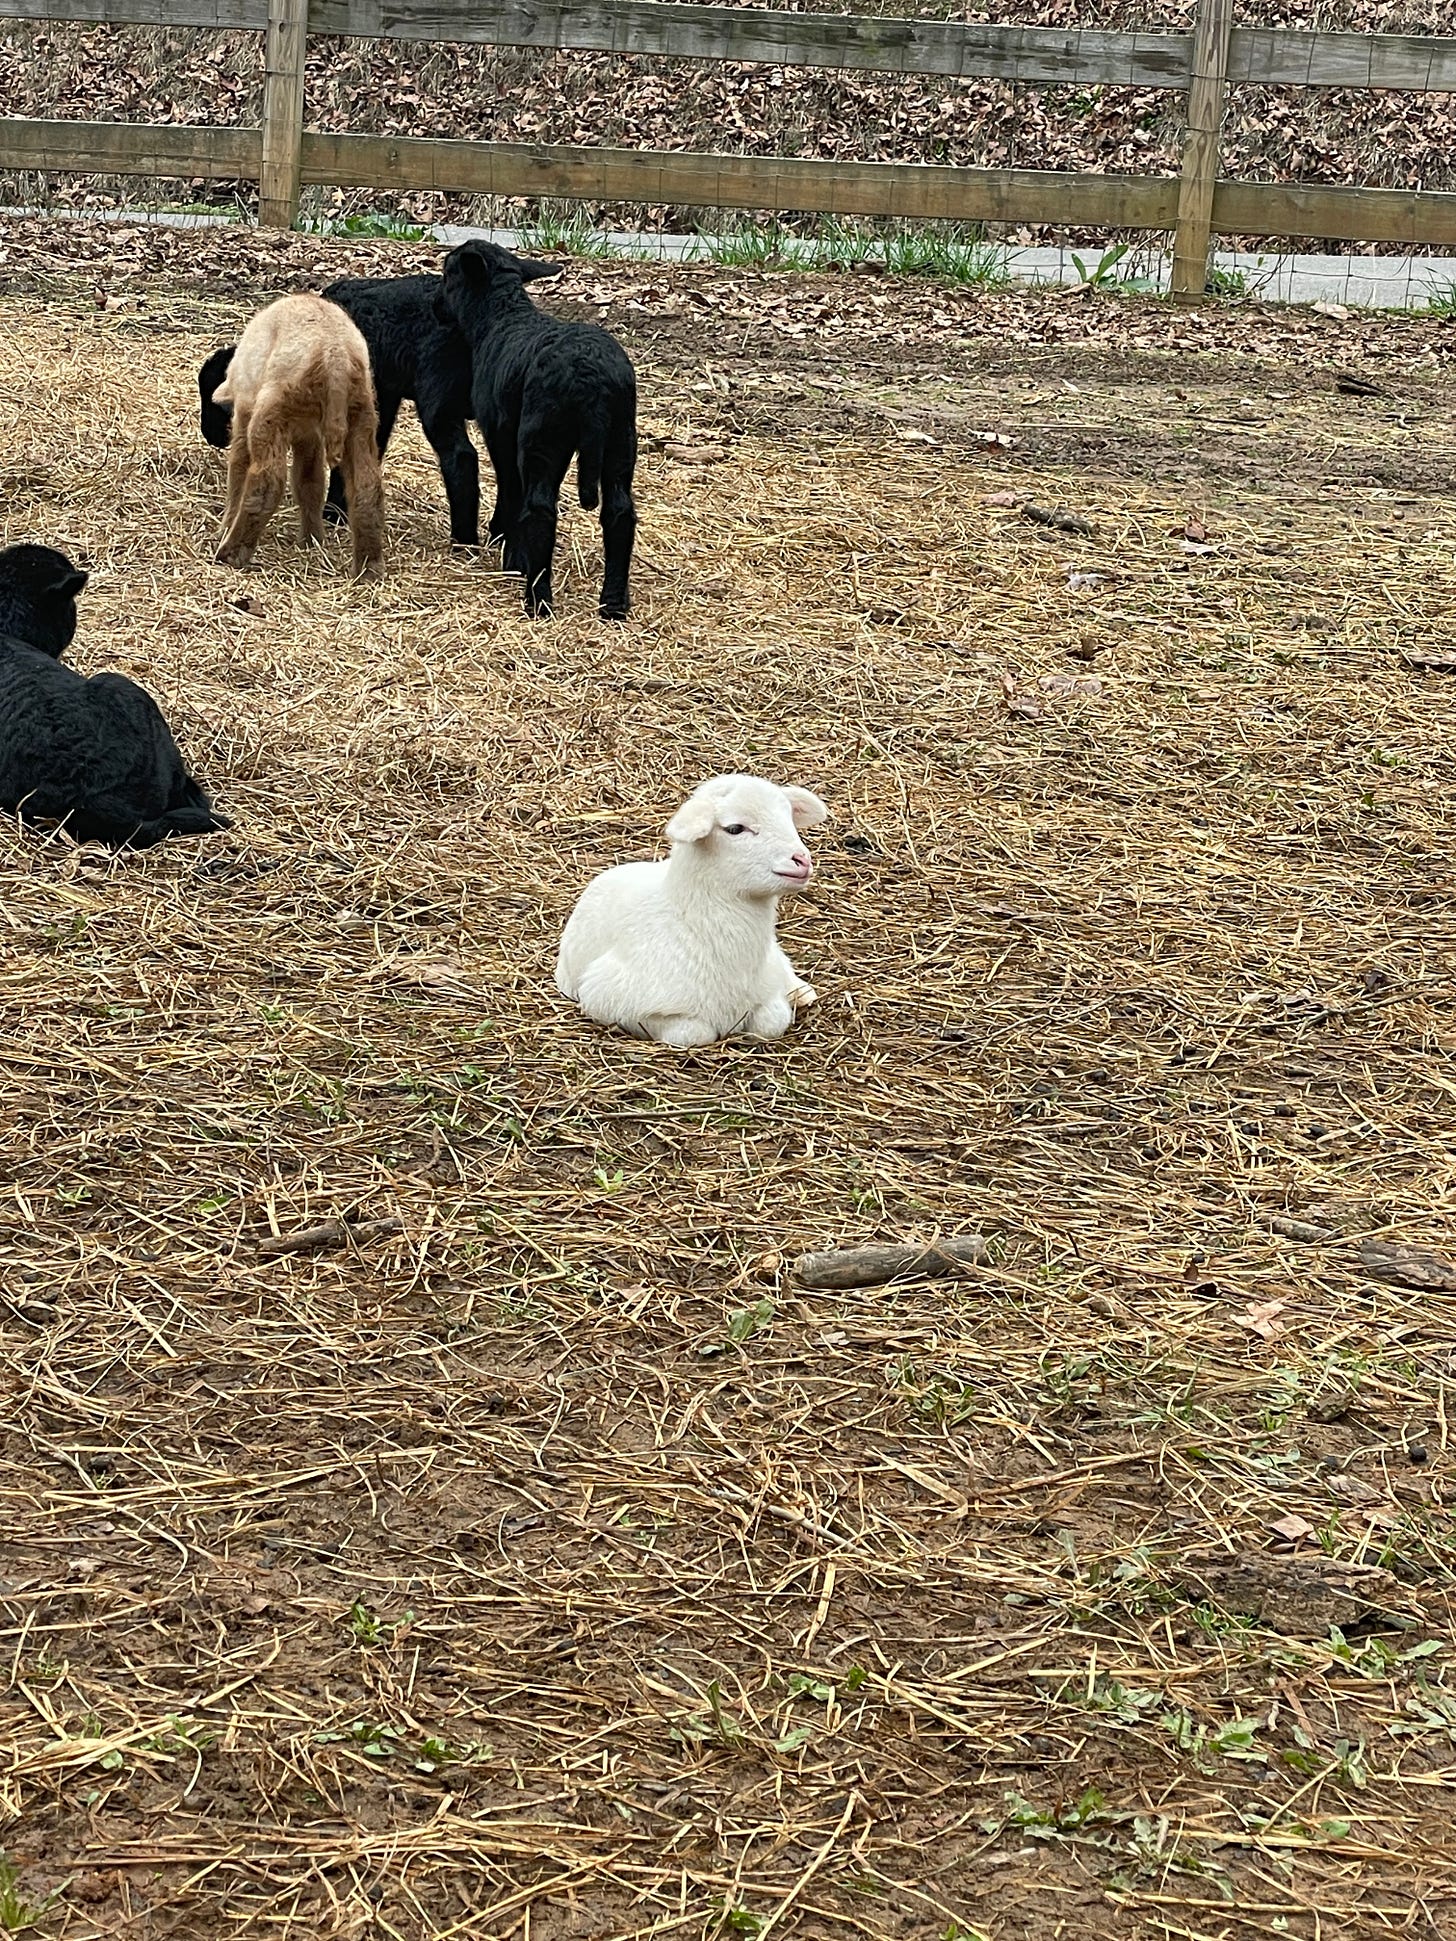 A white baby sheep sits on a patch of dried grass, with more kids in the background